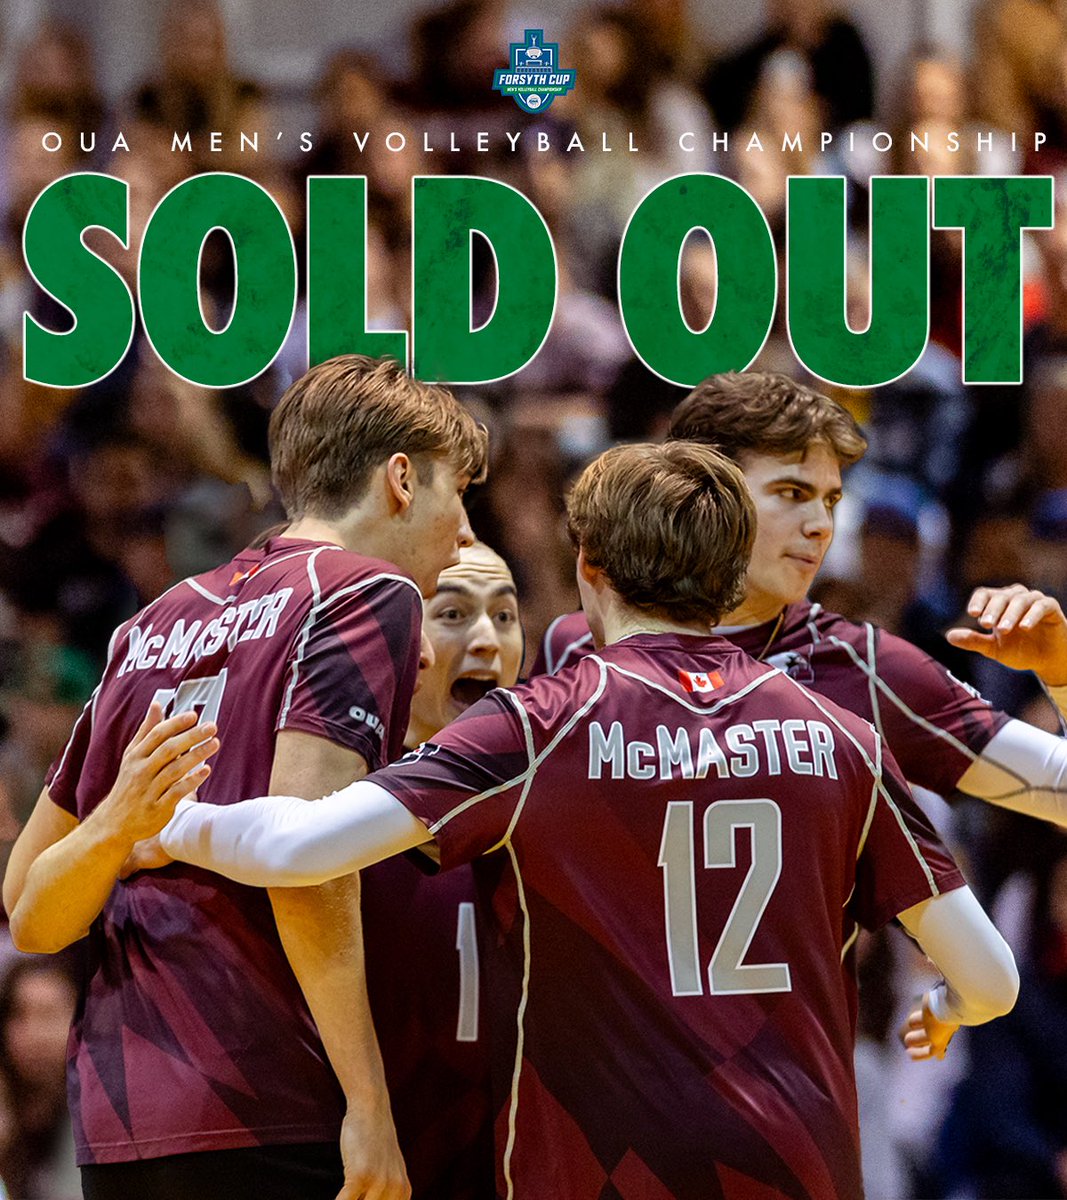 WE ARE SOLD OUT! 👀 The Forsyth Cup on Friday night has officially sold out - thank you to all of our Marauder fans for the support! We can’t wait to see Burridge packed! 🔥 If you didn’t get your ticket, you can still catch all of the action on OUA.tv or…